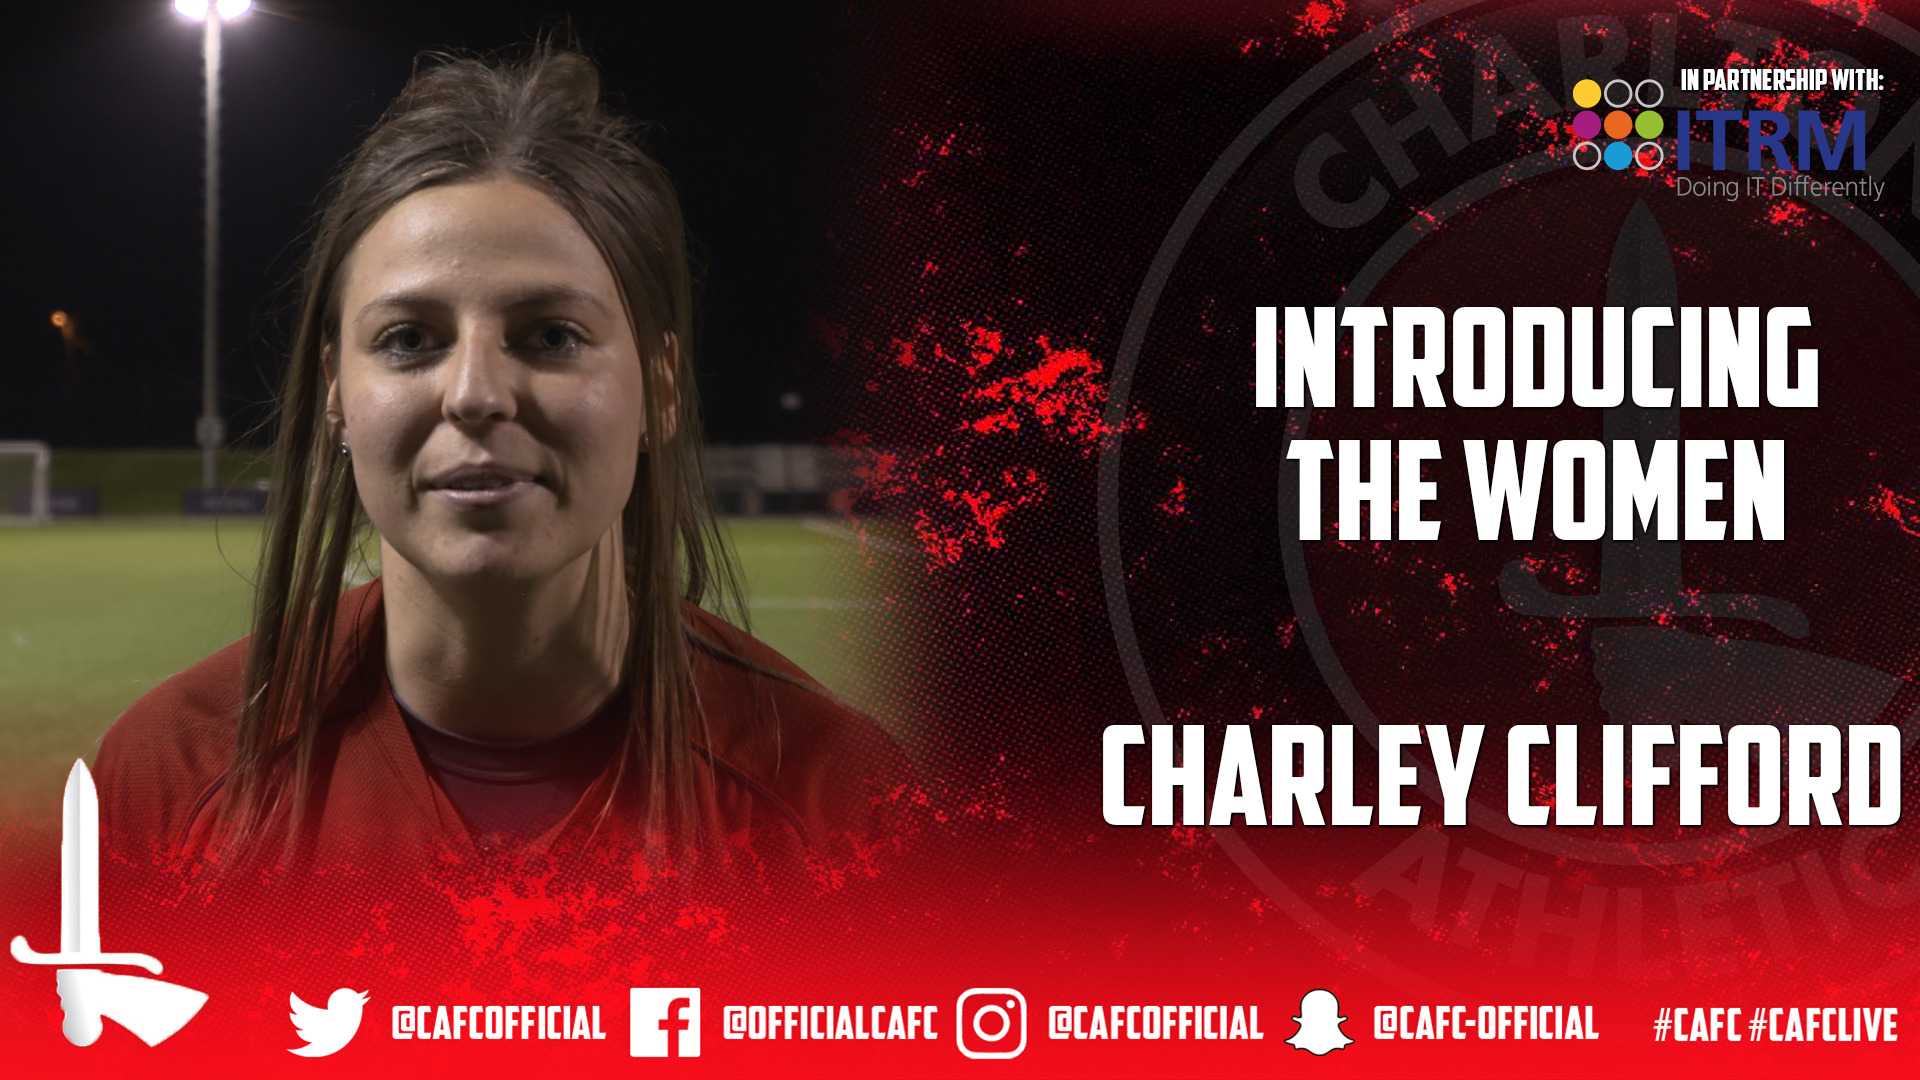 INTRODUCING THE WOMEN | Charley Clifford